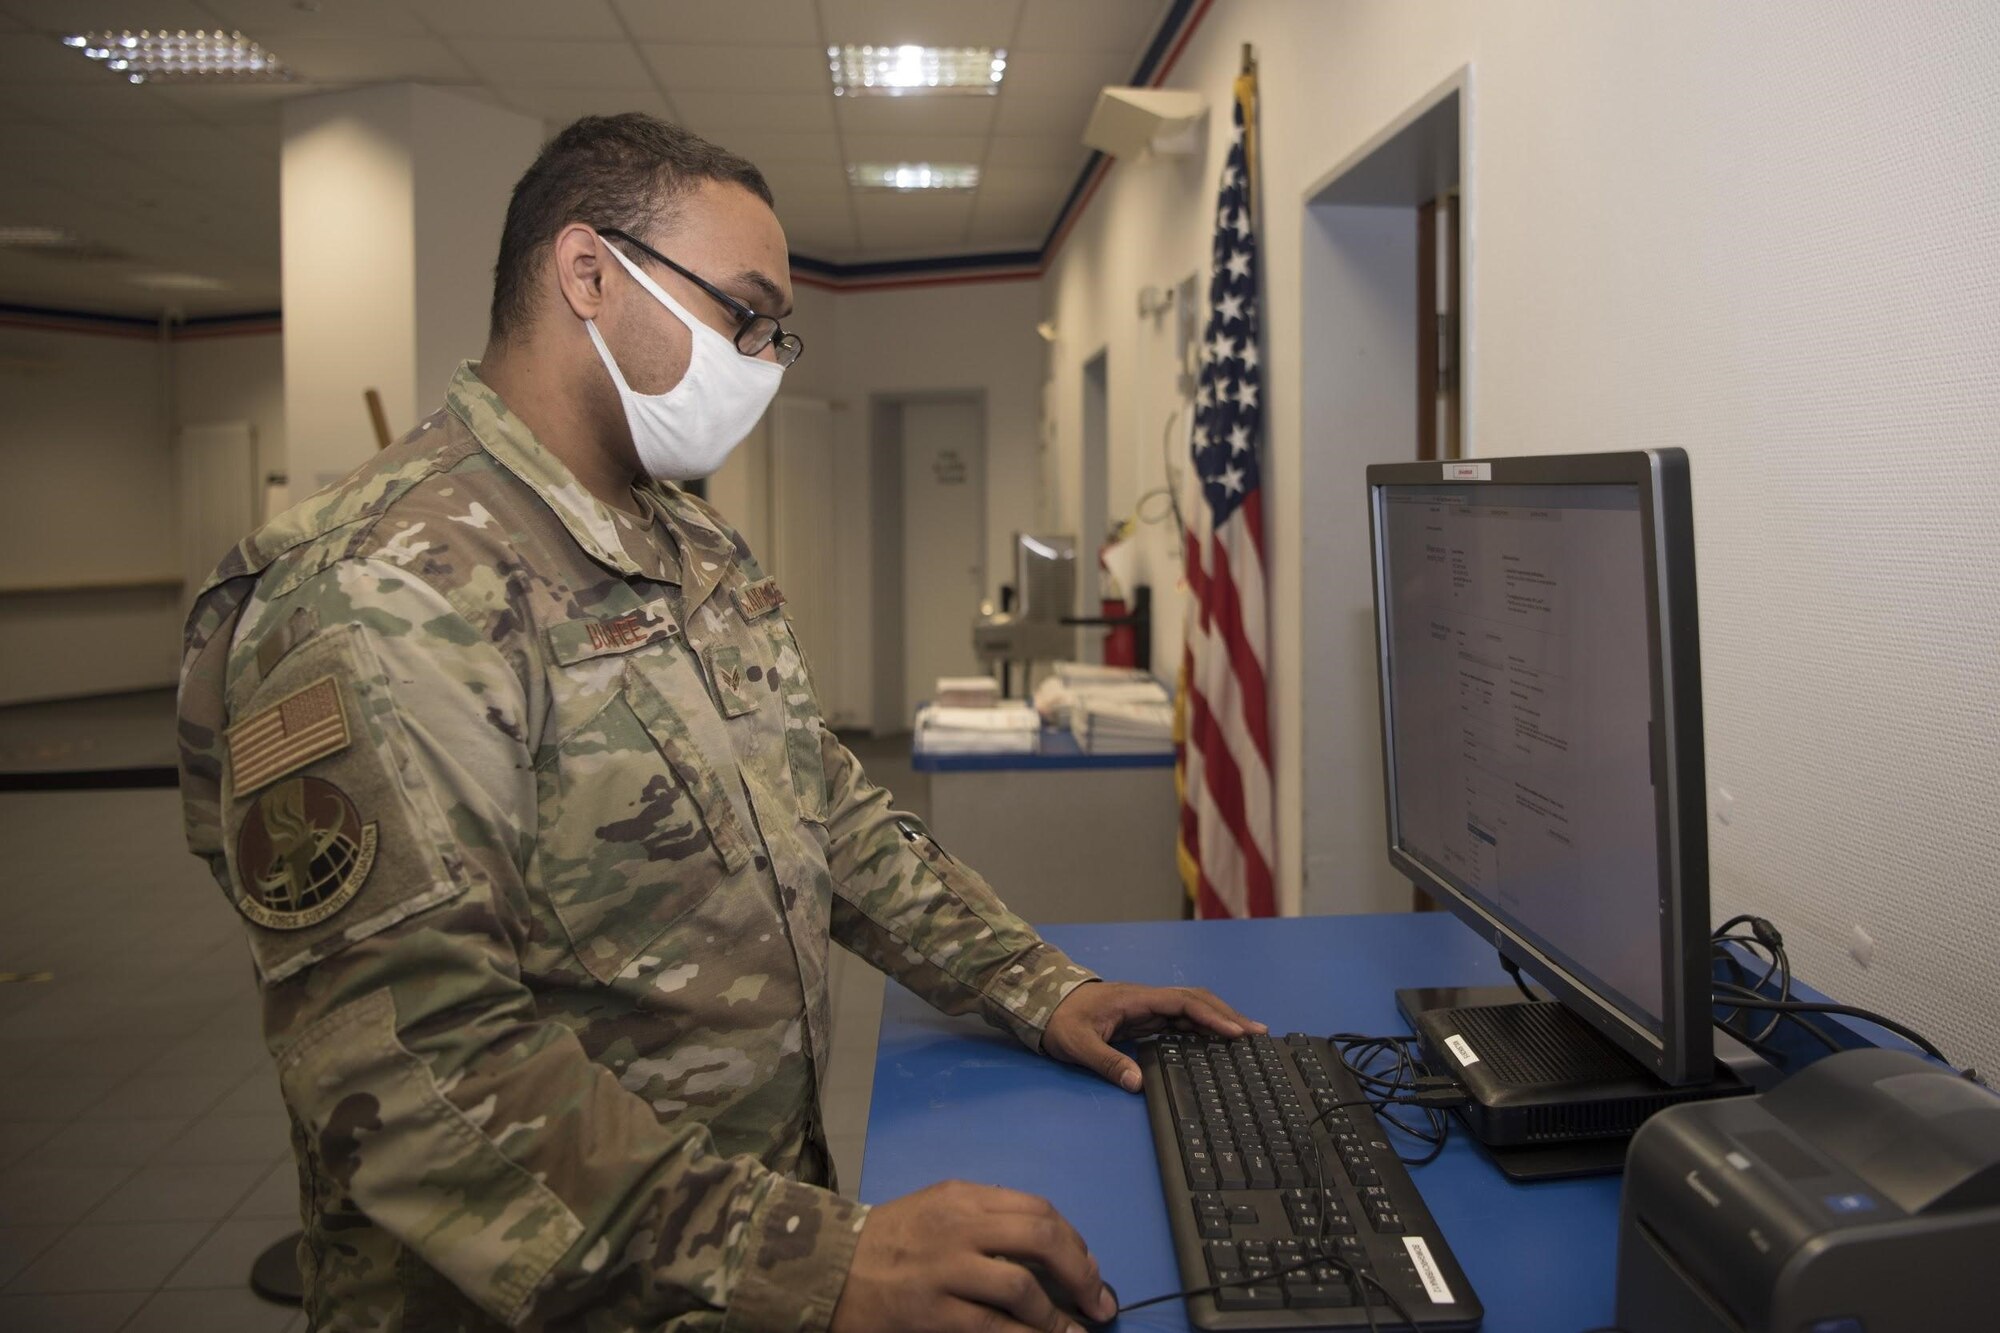 U.S. Air Force Senior Airman Patric Bushee, 786th Force Support Squadron military postal clerk, navigates to the United States Postal Service website on Ramstein Air Base, Germany, July 20, 2020. Two Click-N-Ship kiosks can be found at the Northside Post Office and are dedicated primarily to customers unfamiliar with the process or for those without printer access. (U.S. Air Force photo by Senior Airman Kristof J. Rixmann)